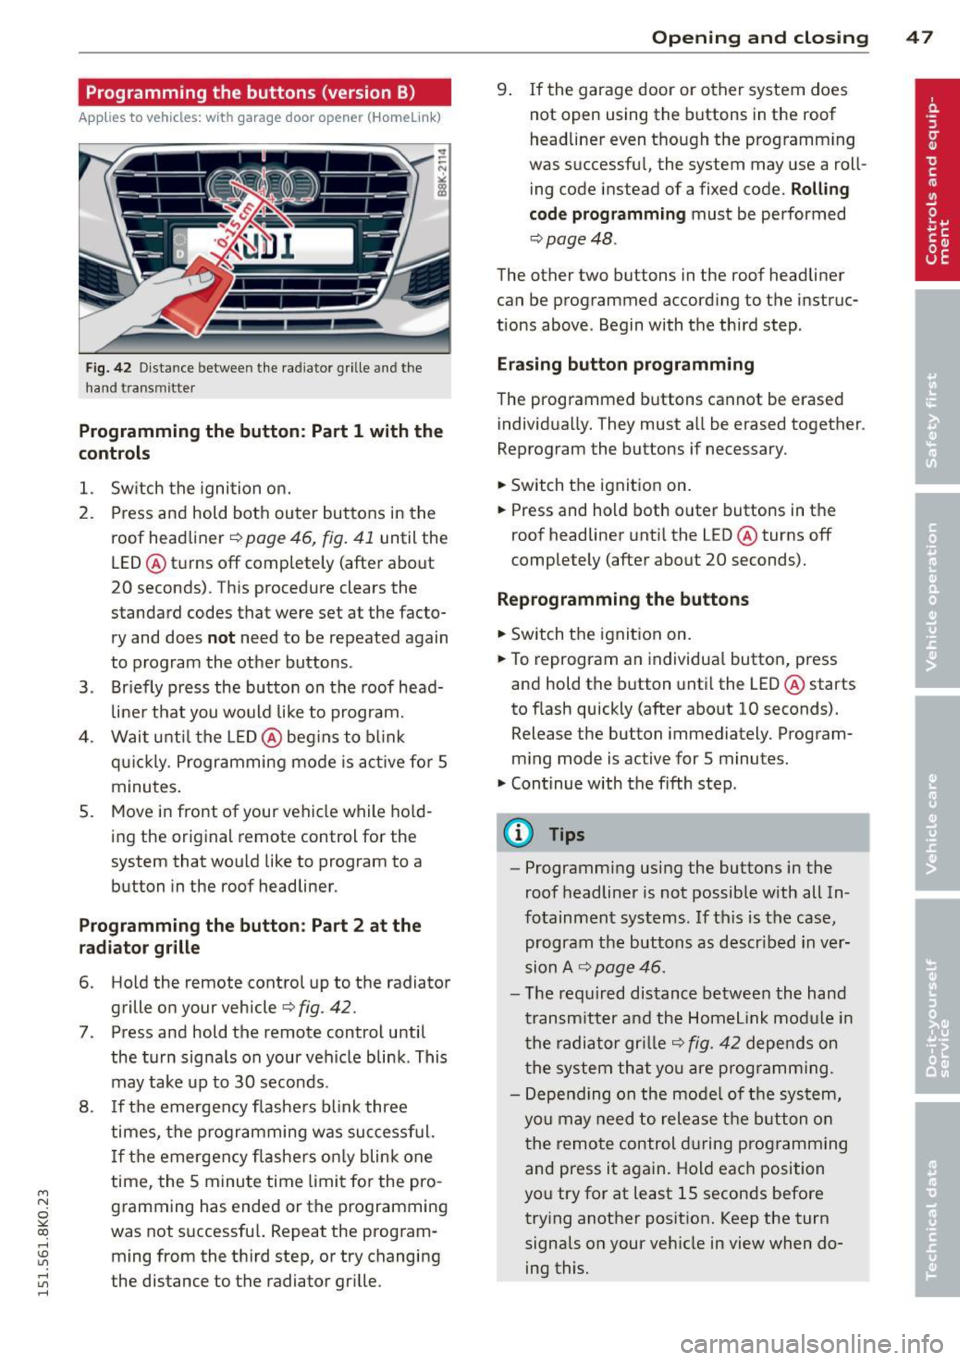 AUDI S4 2015 Service Manual M N 
~ co 
rl I.O 
" rl 
" rl 
Programming  the  buttons (version B) 
Applies  to vehicles:  with  garage door  opener  (Homelink) 
Fig. 42 D ista nce betwee n the  radiator  gr ille  a nd t he 
han